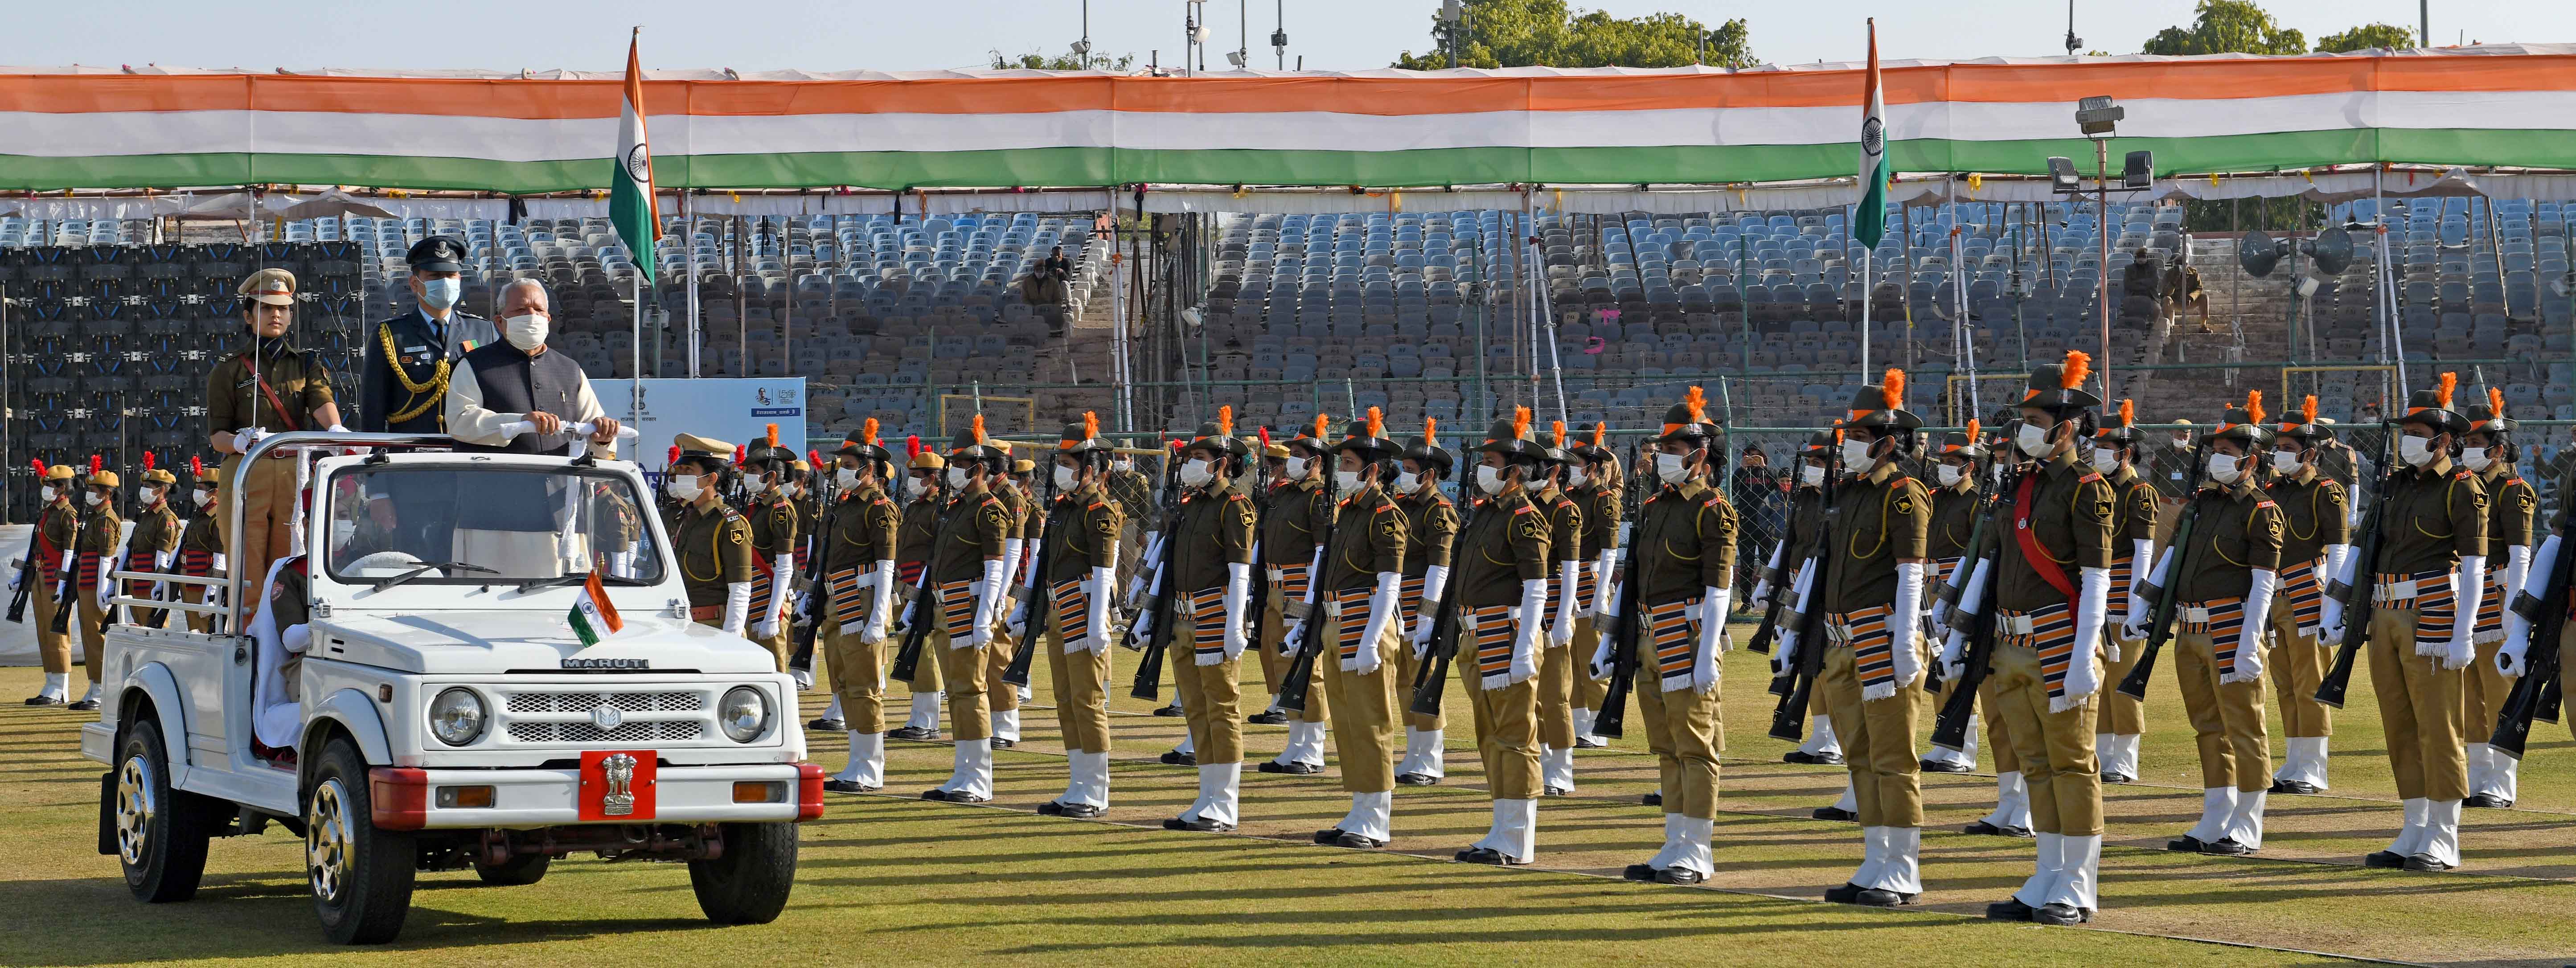 Hon’ble Governor of Rajasthan inspected the guard of honour and unfurled the Tricolour followed by the National Anthem at SMS Stadium and Raj Bhawan on 72nd  Republic Day.